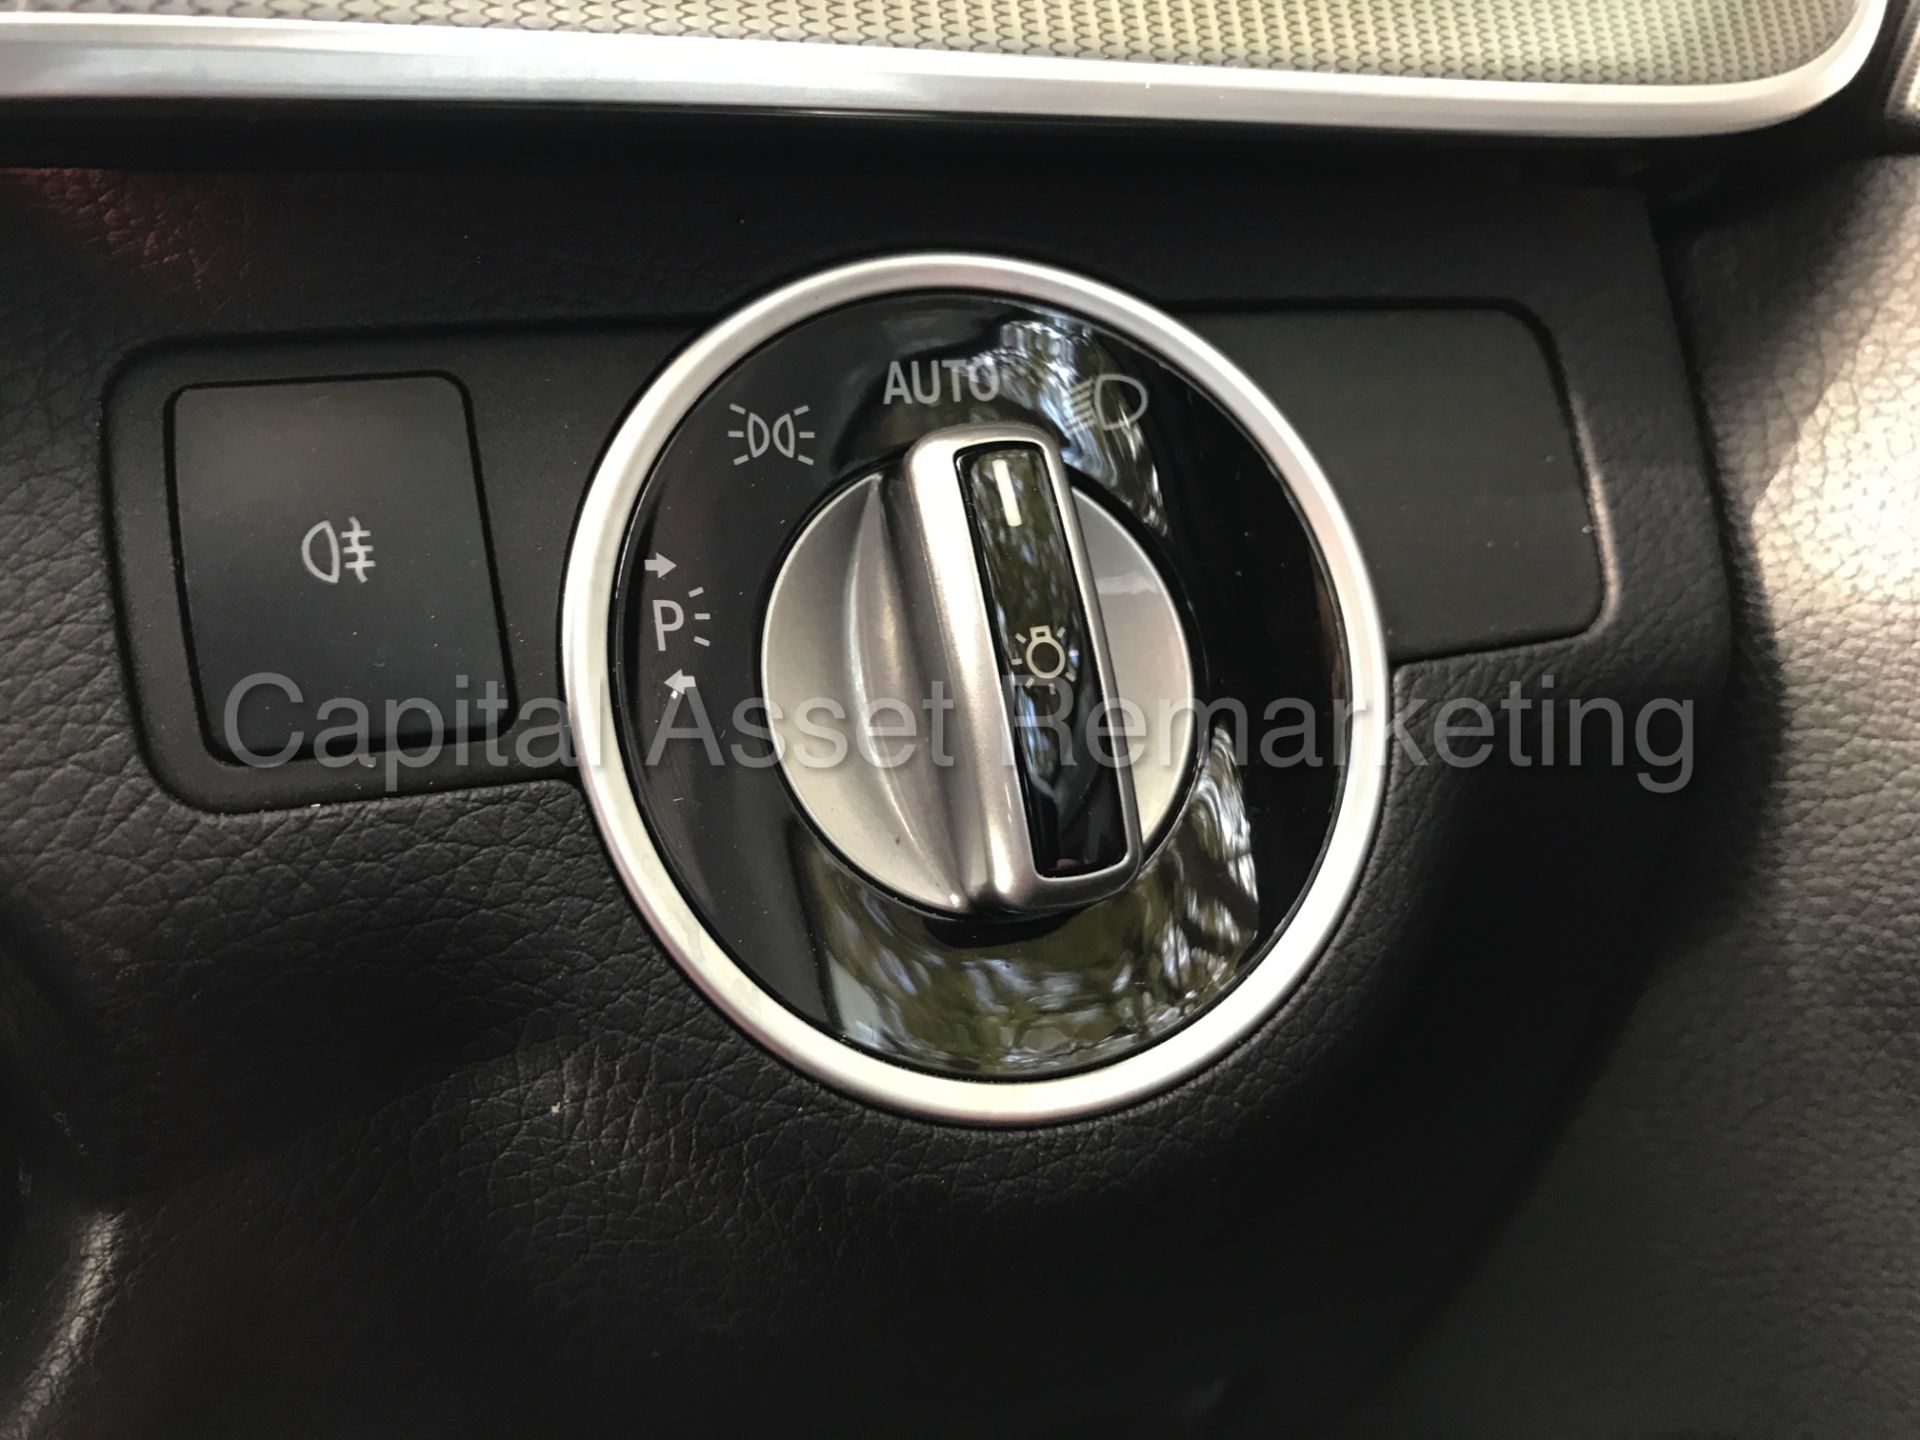 MERCEDES-BENZ E220 'AMG SPORT' (2015 MODEL) 'SALOON - AUTO - PAN ROOF - SAT NAV - LEATHER' *LOOK* - Image 22 of 33